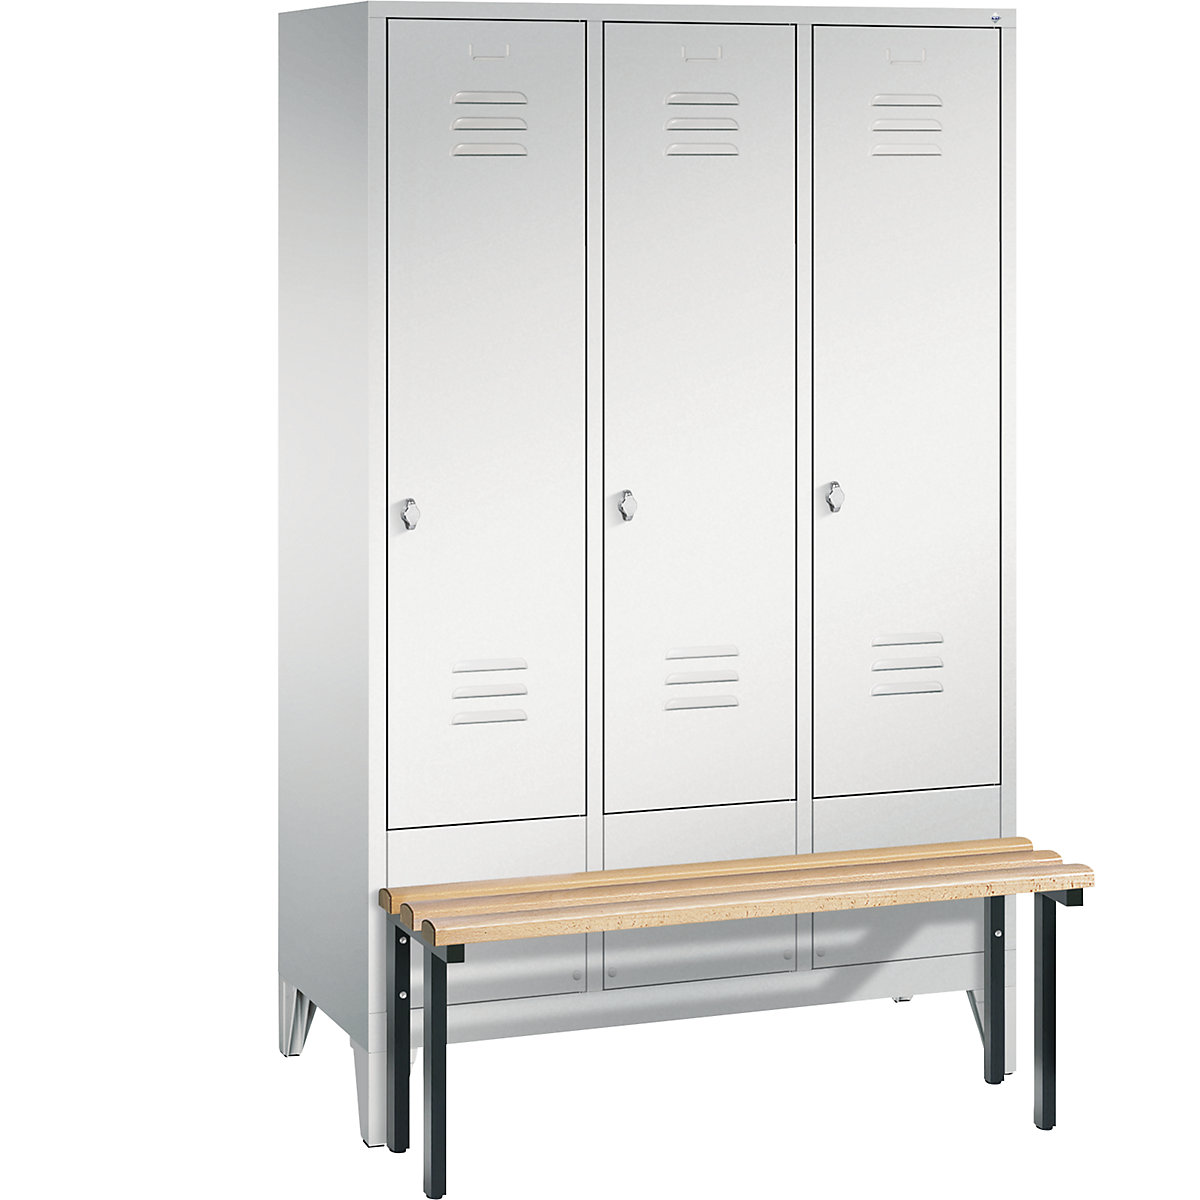 CLASSIC cloakroom locker with bench mounted in front – C+P, 3 compartments, compartment width 400 mm, light grey-6